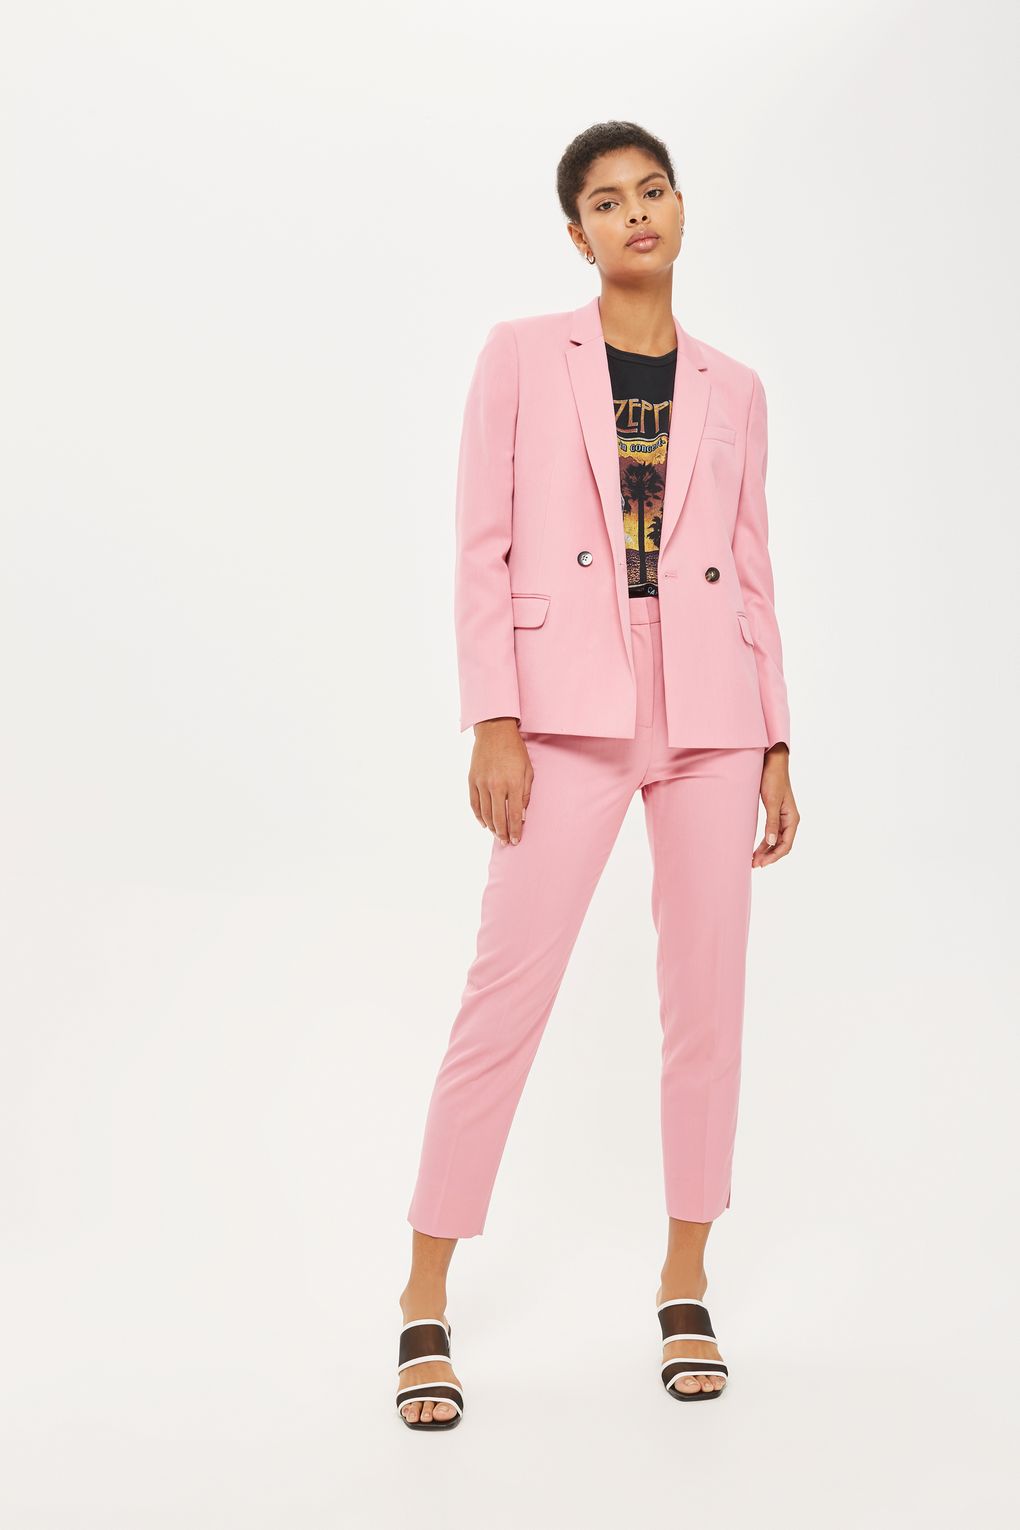 Topshop Double Breasted Suit Jacket in Pink